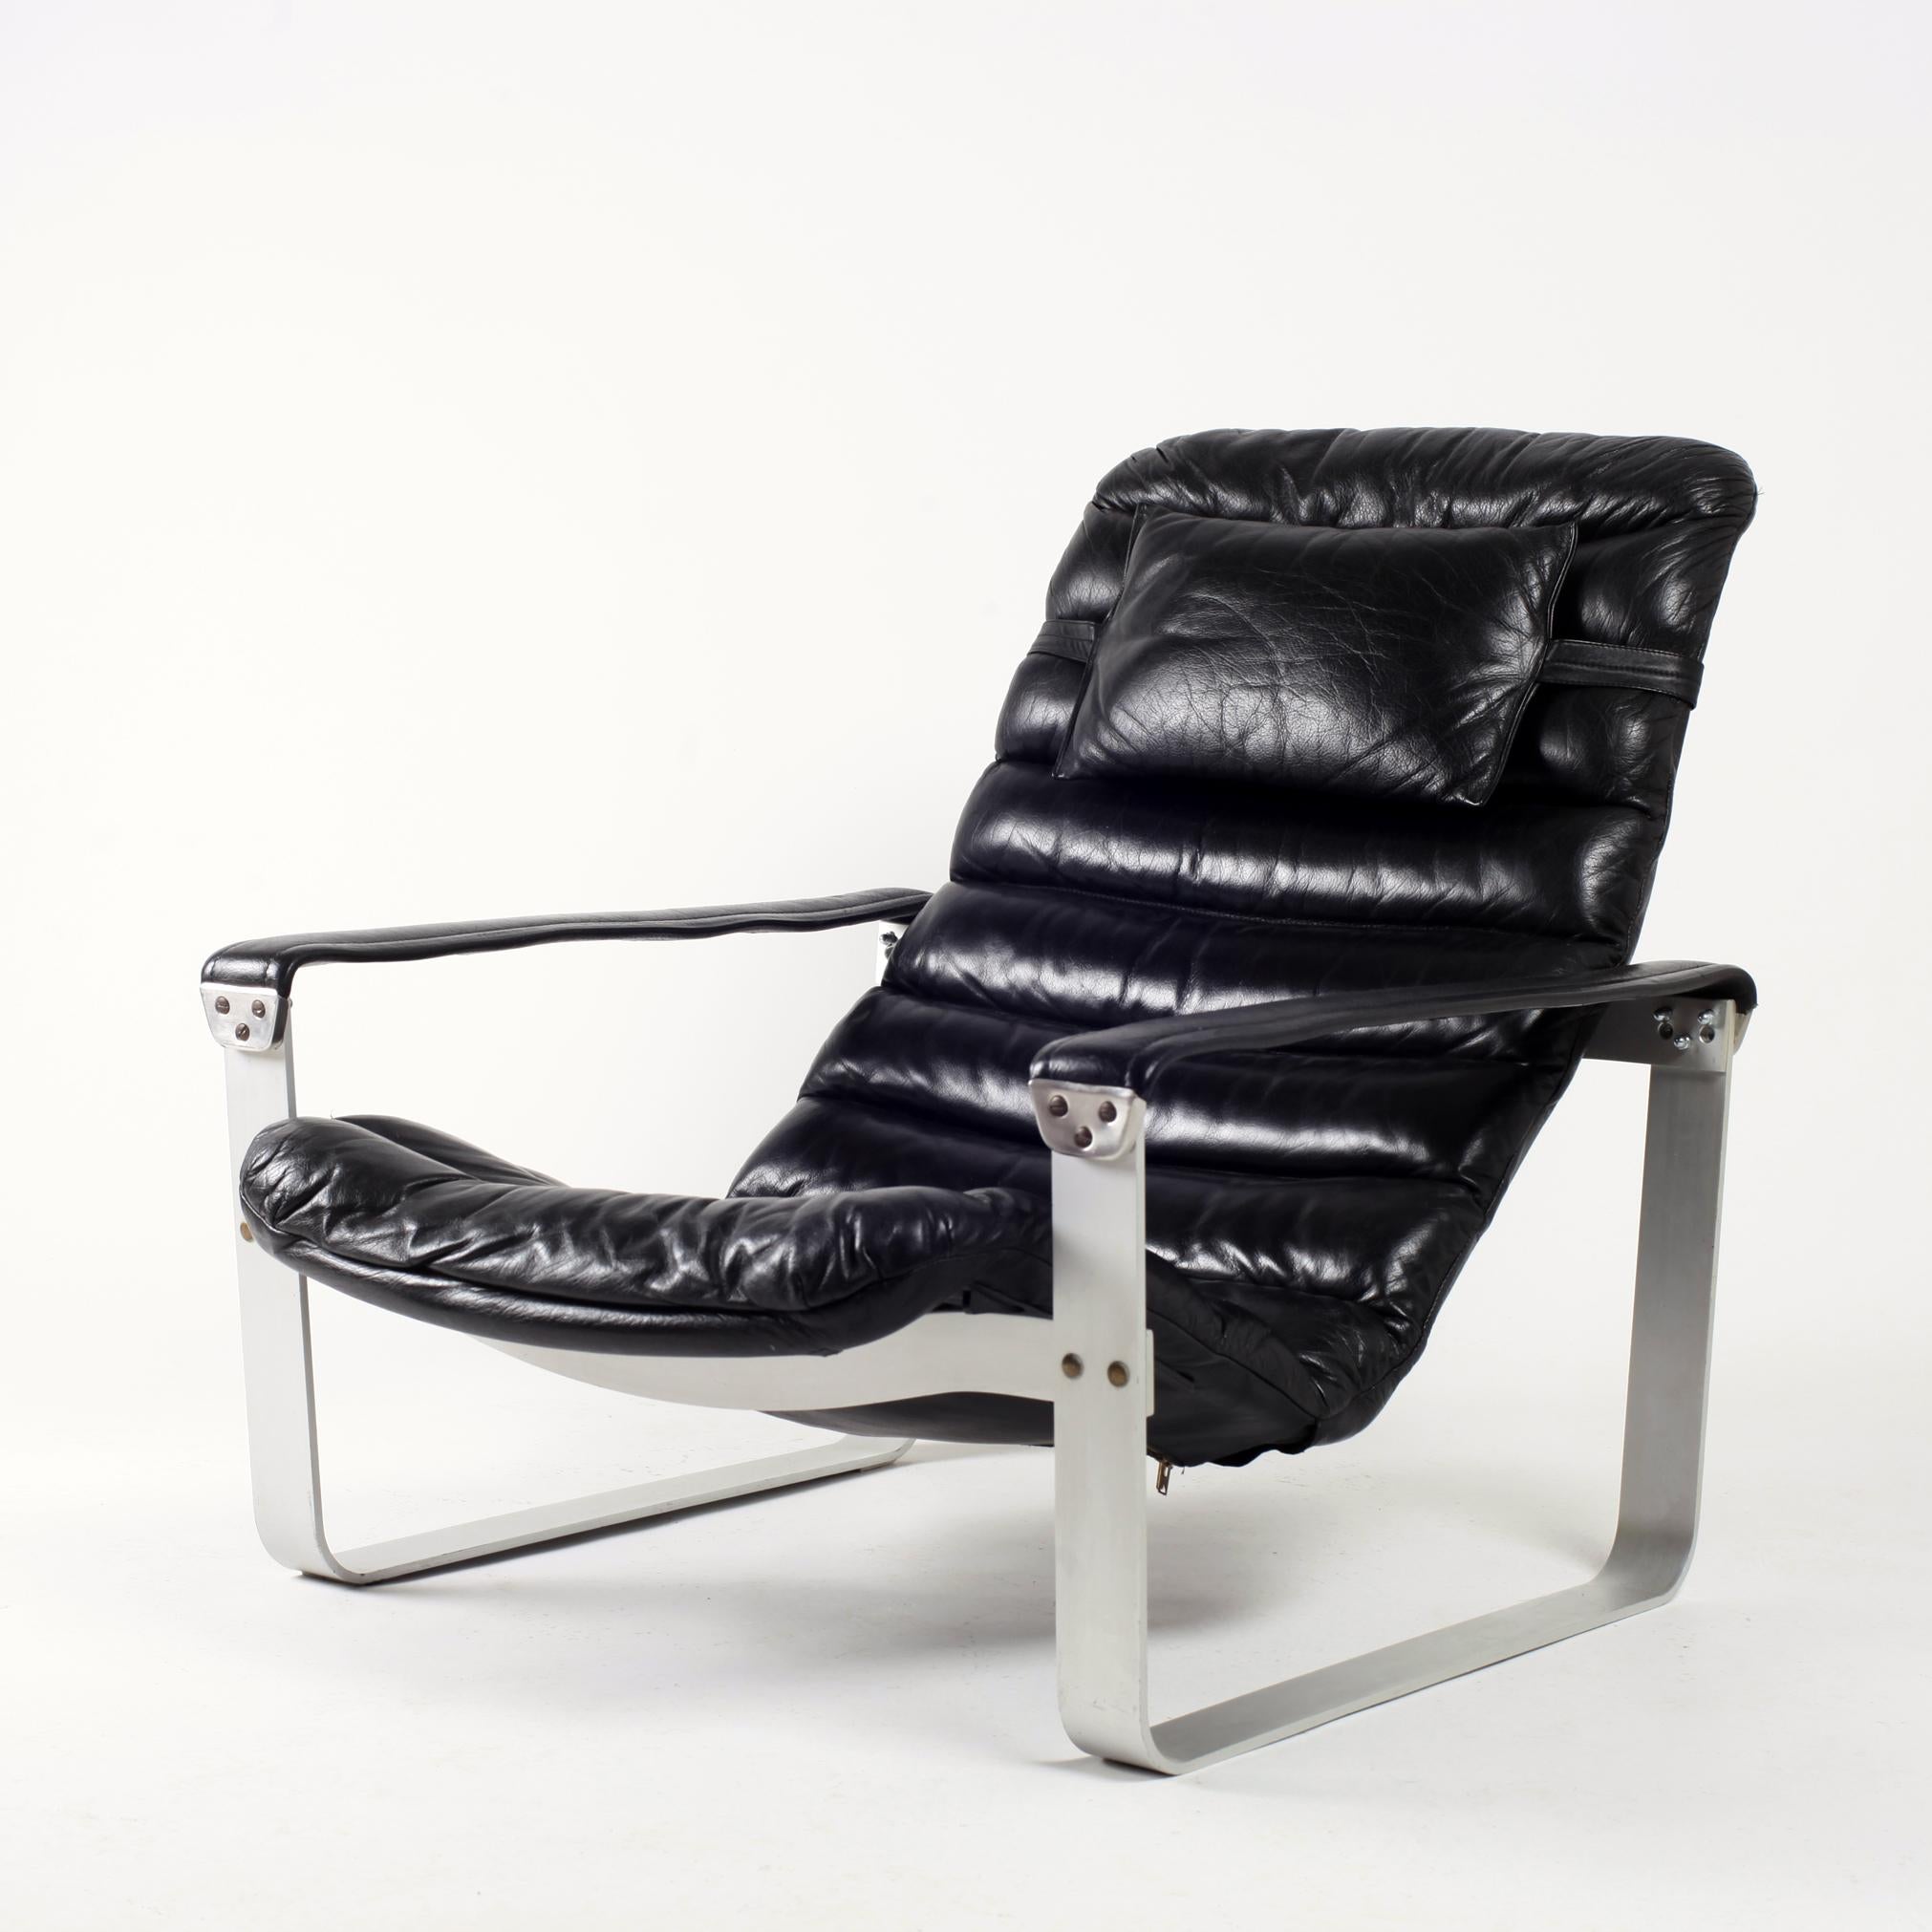 Pulkka lounge chair by Ilmari Lappalainen for Asko.
Aluminium frame with adjustable (three positions) black leather seat and armrest.
      